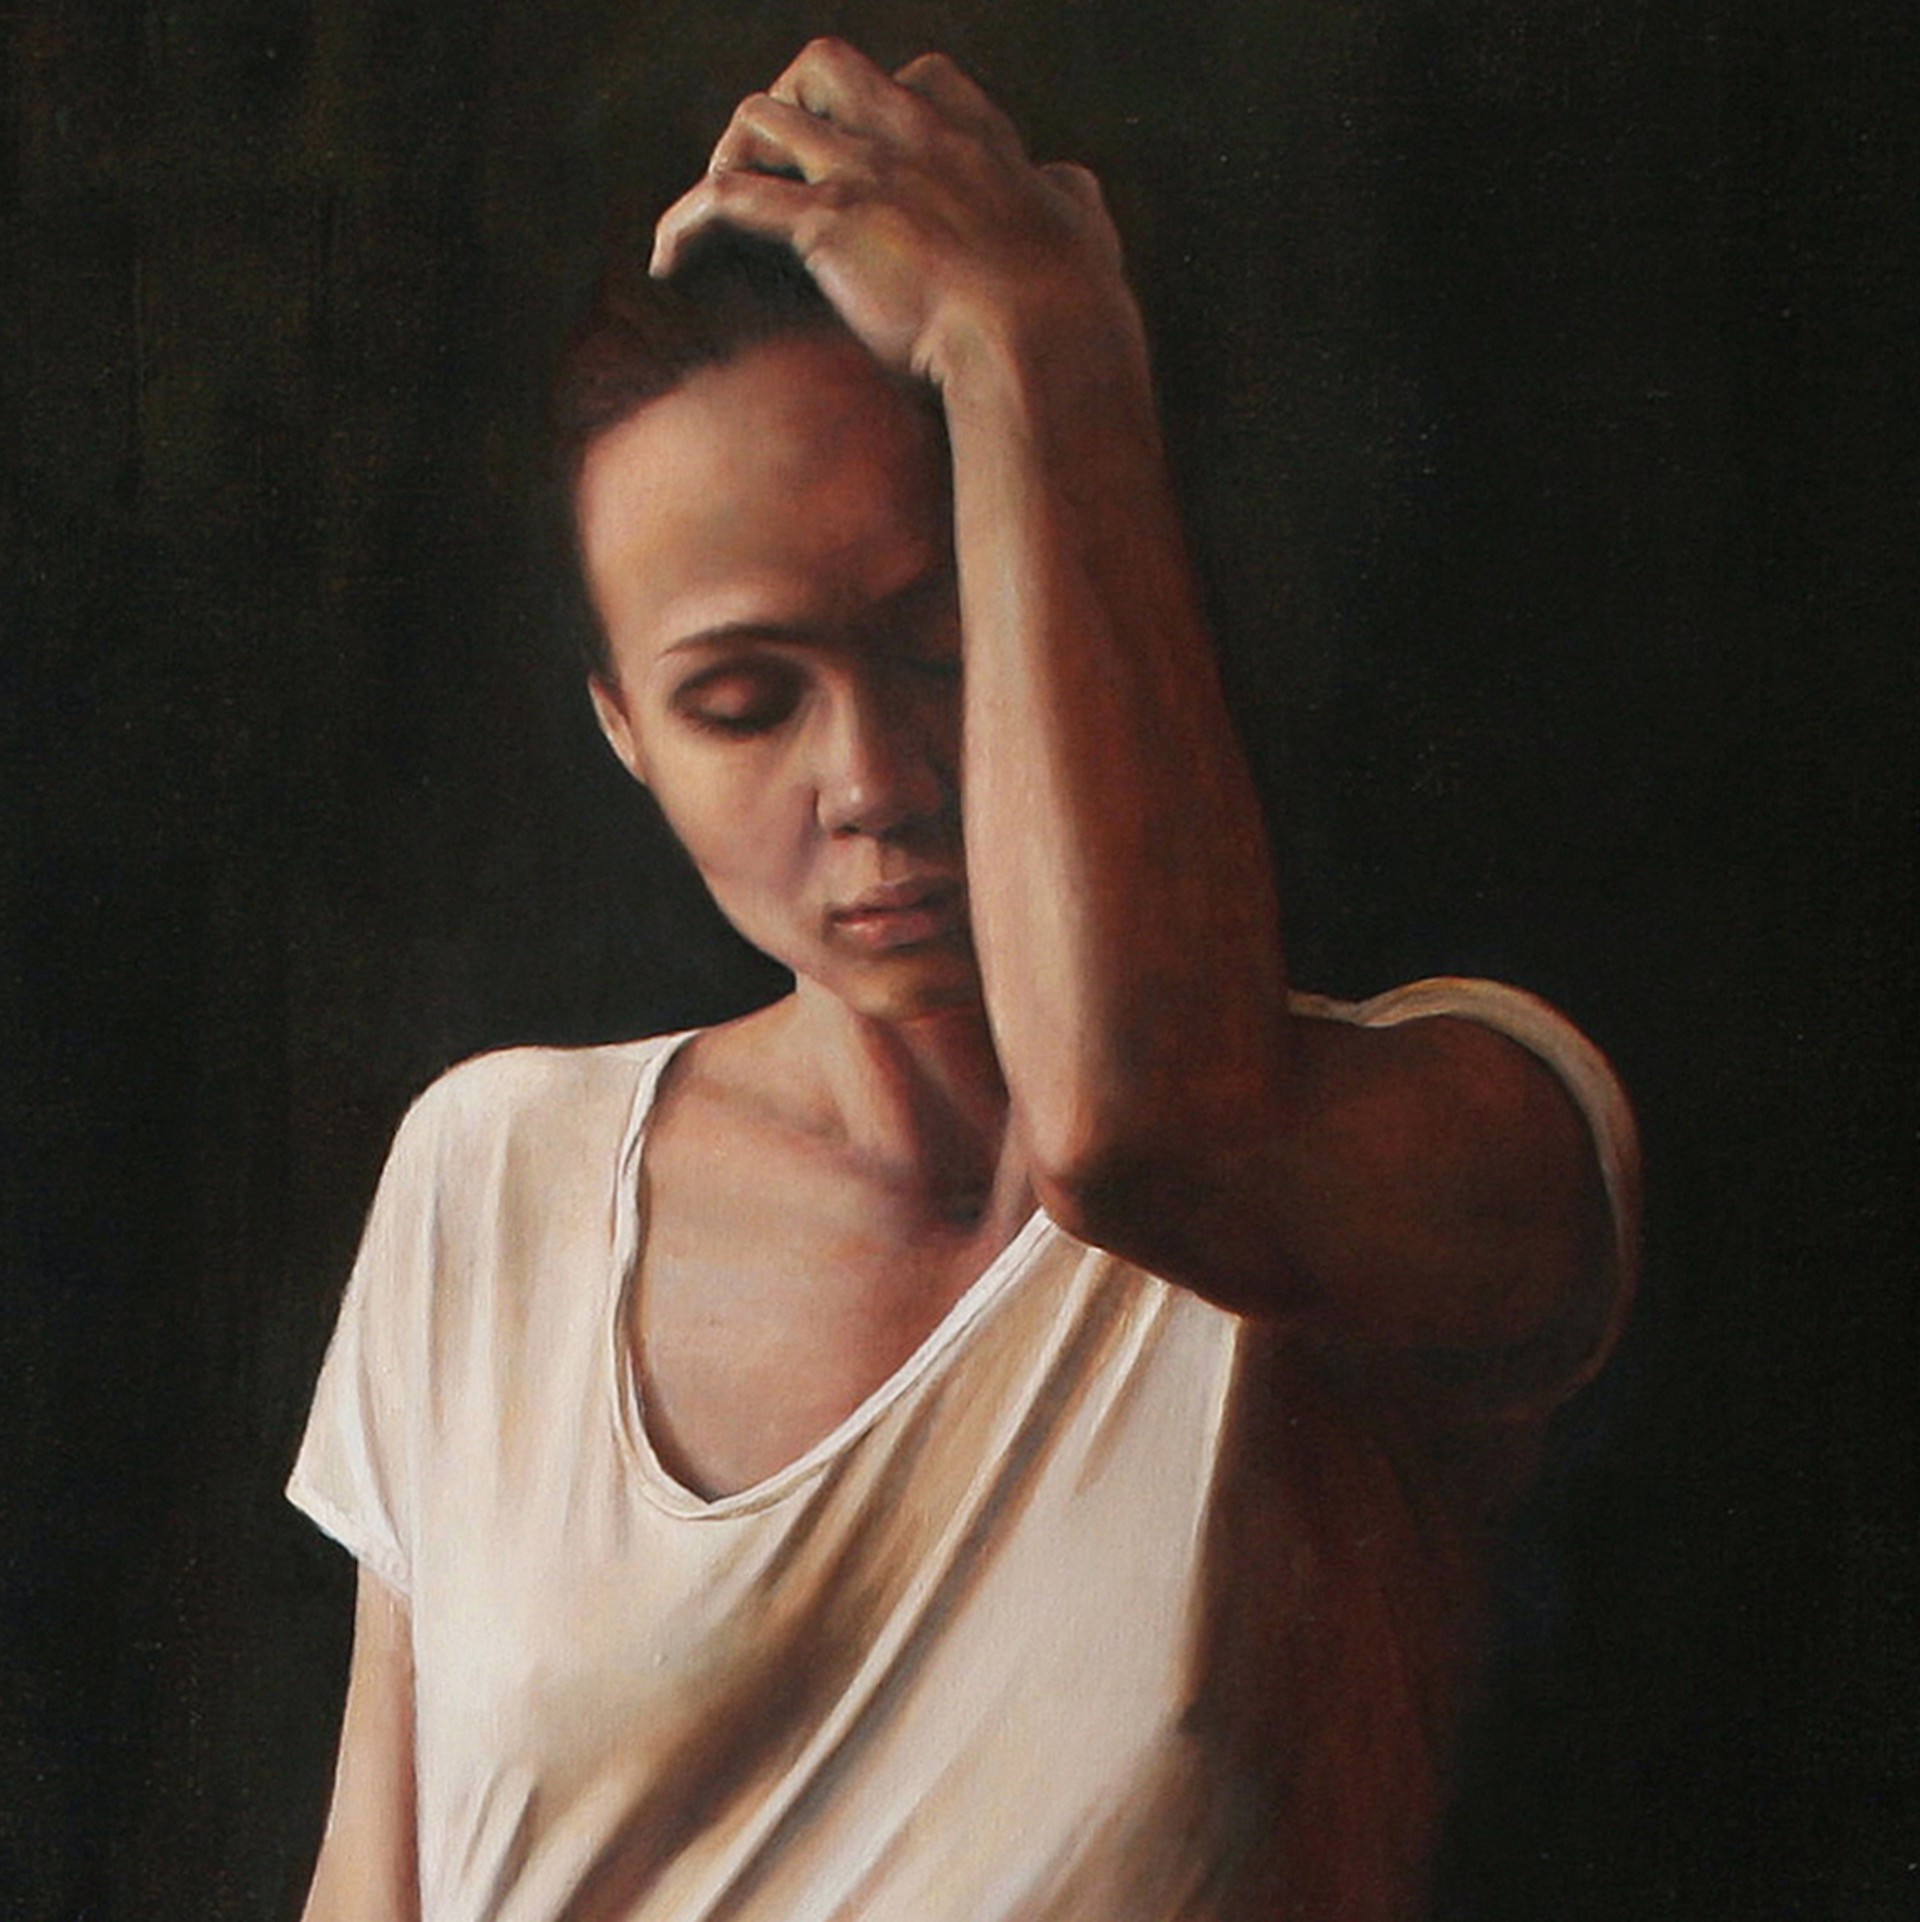 Expressive figurative oil painting "Falling to Pieces" by Victoria Novak, depicting a young woman in a white dress with her arm raised, against a dark, abstract background with dripping paint.